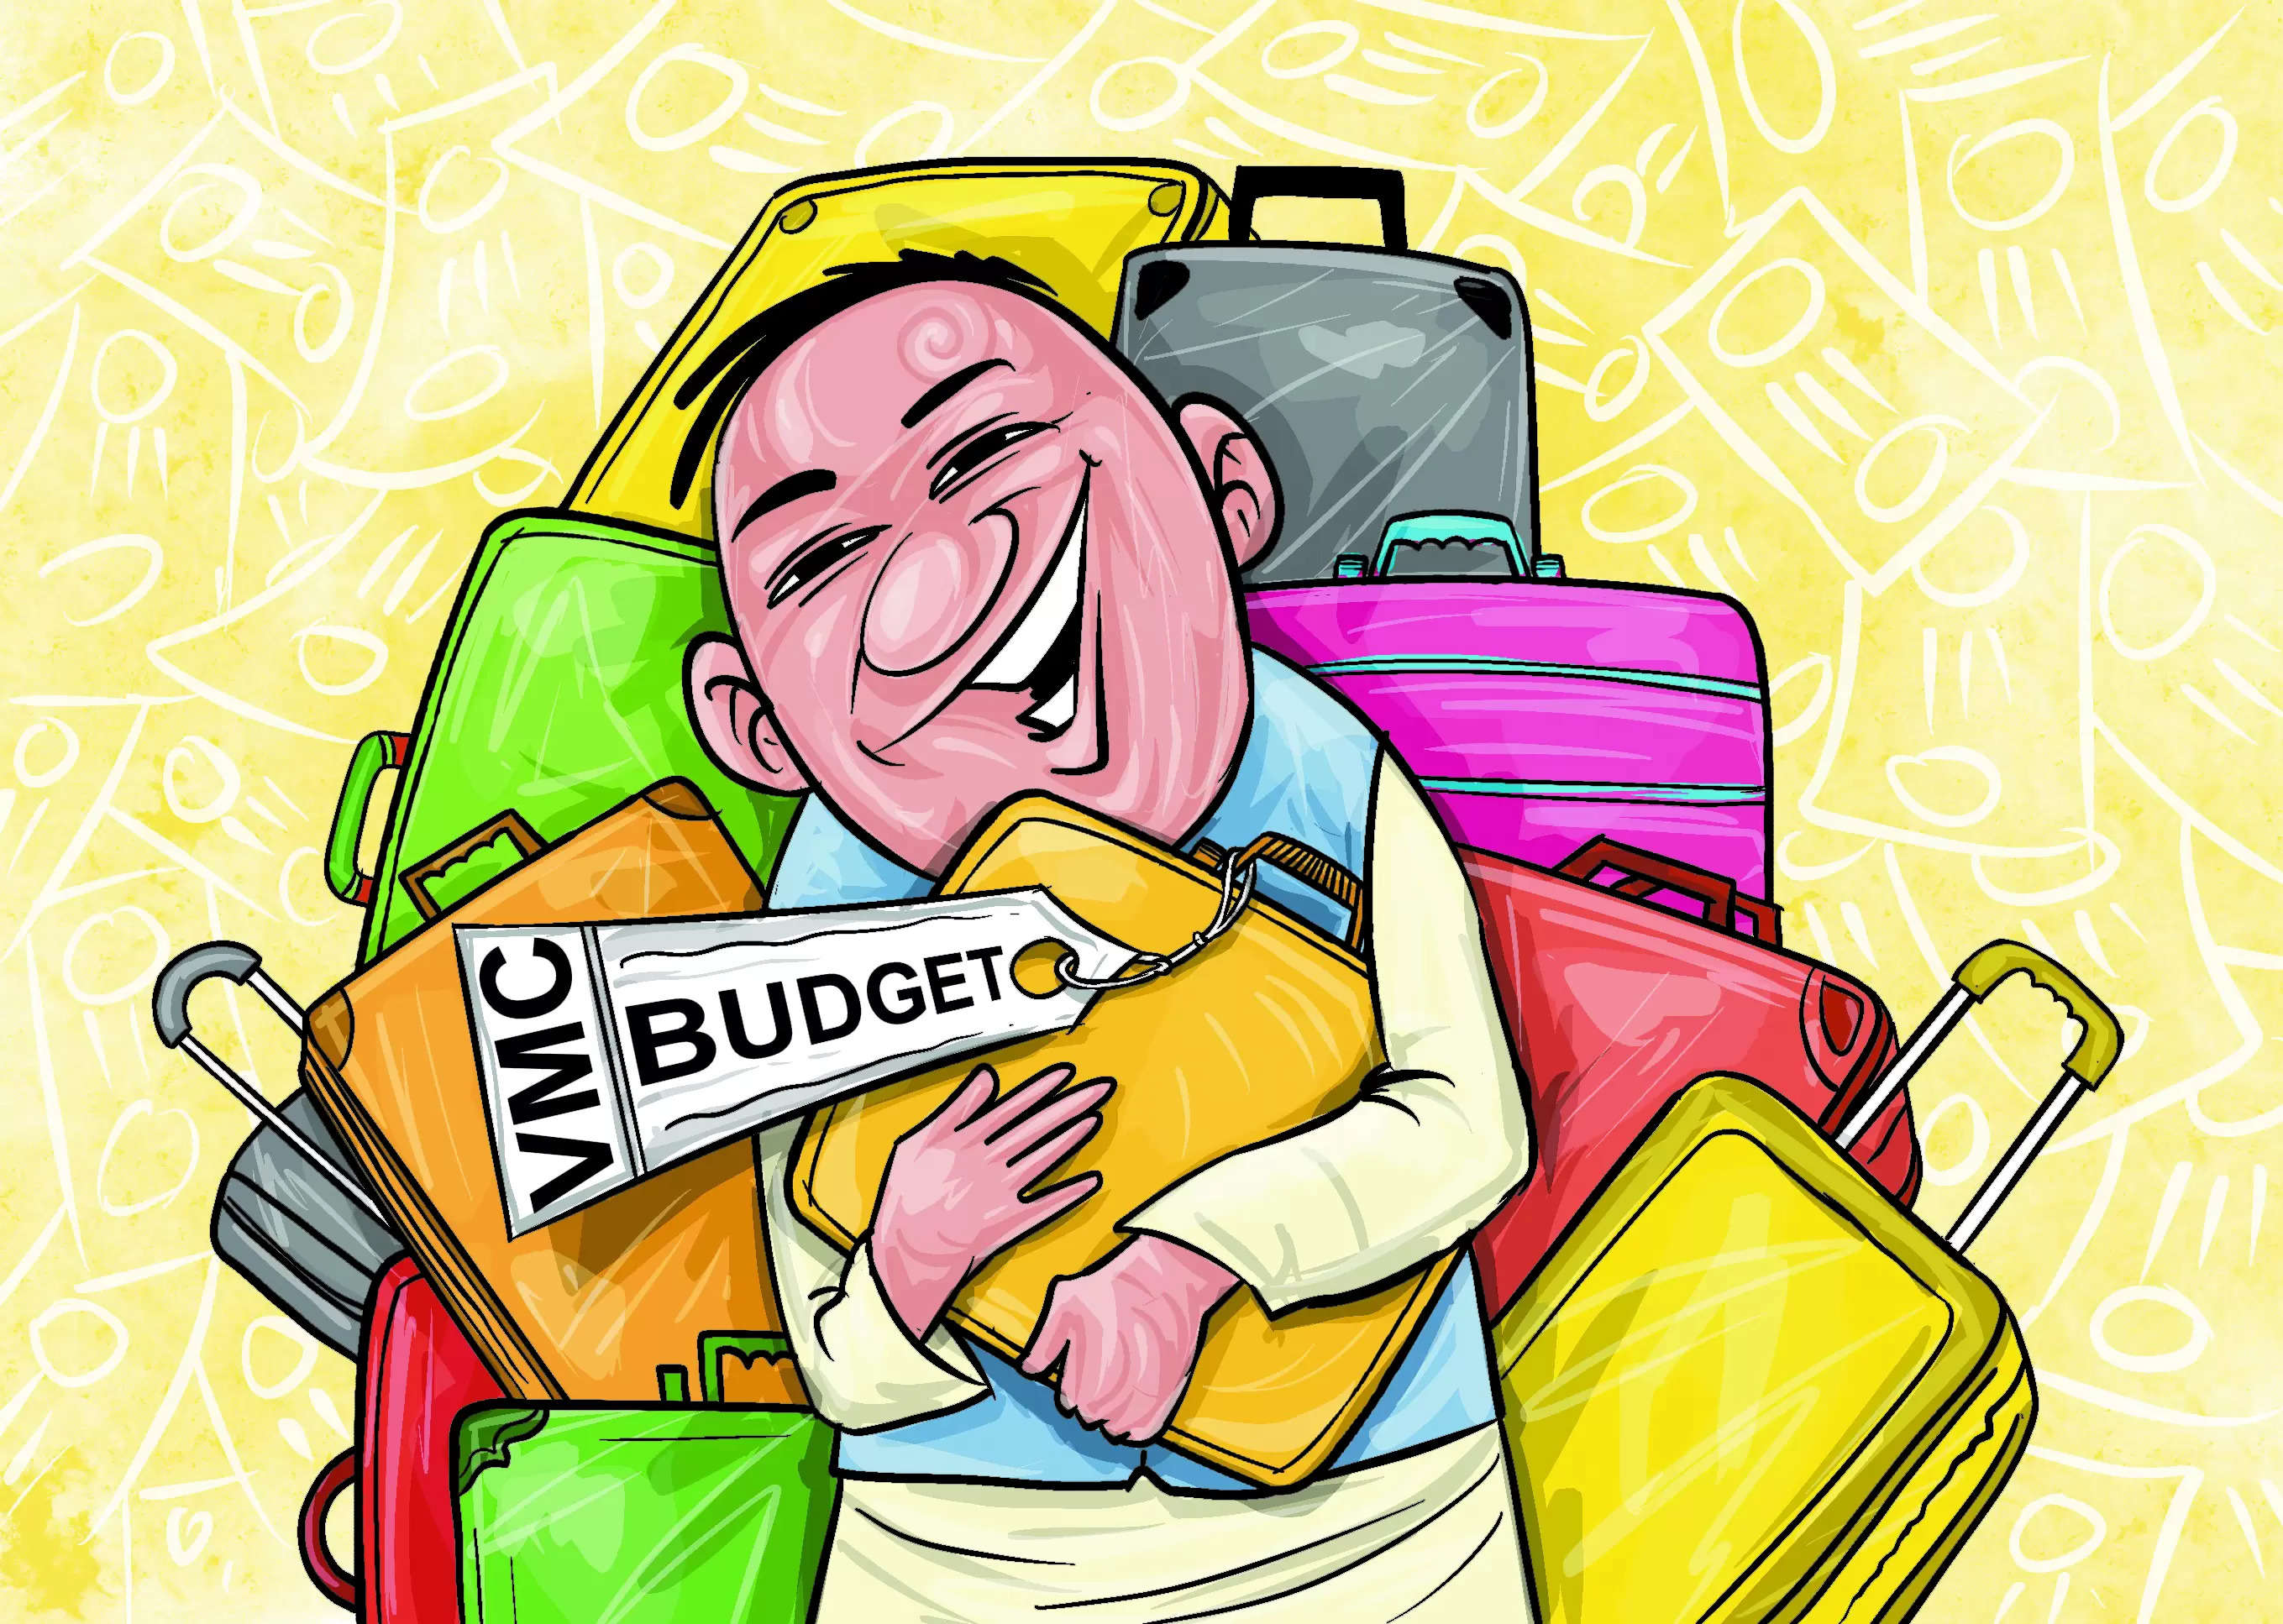 VMC to splurge on costly suitcases